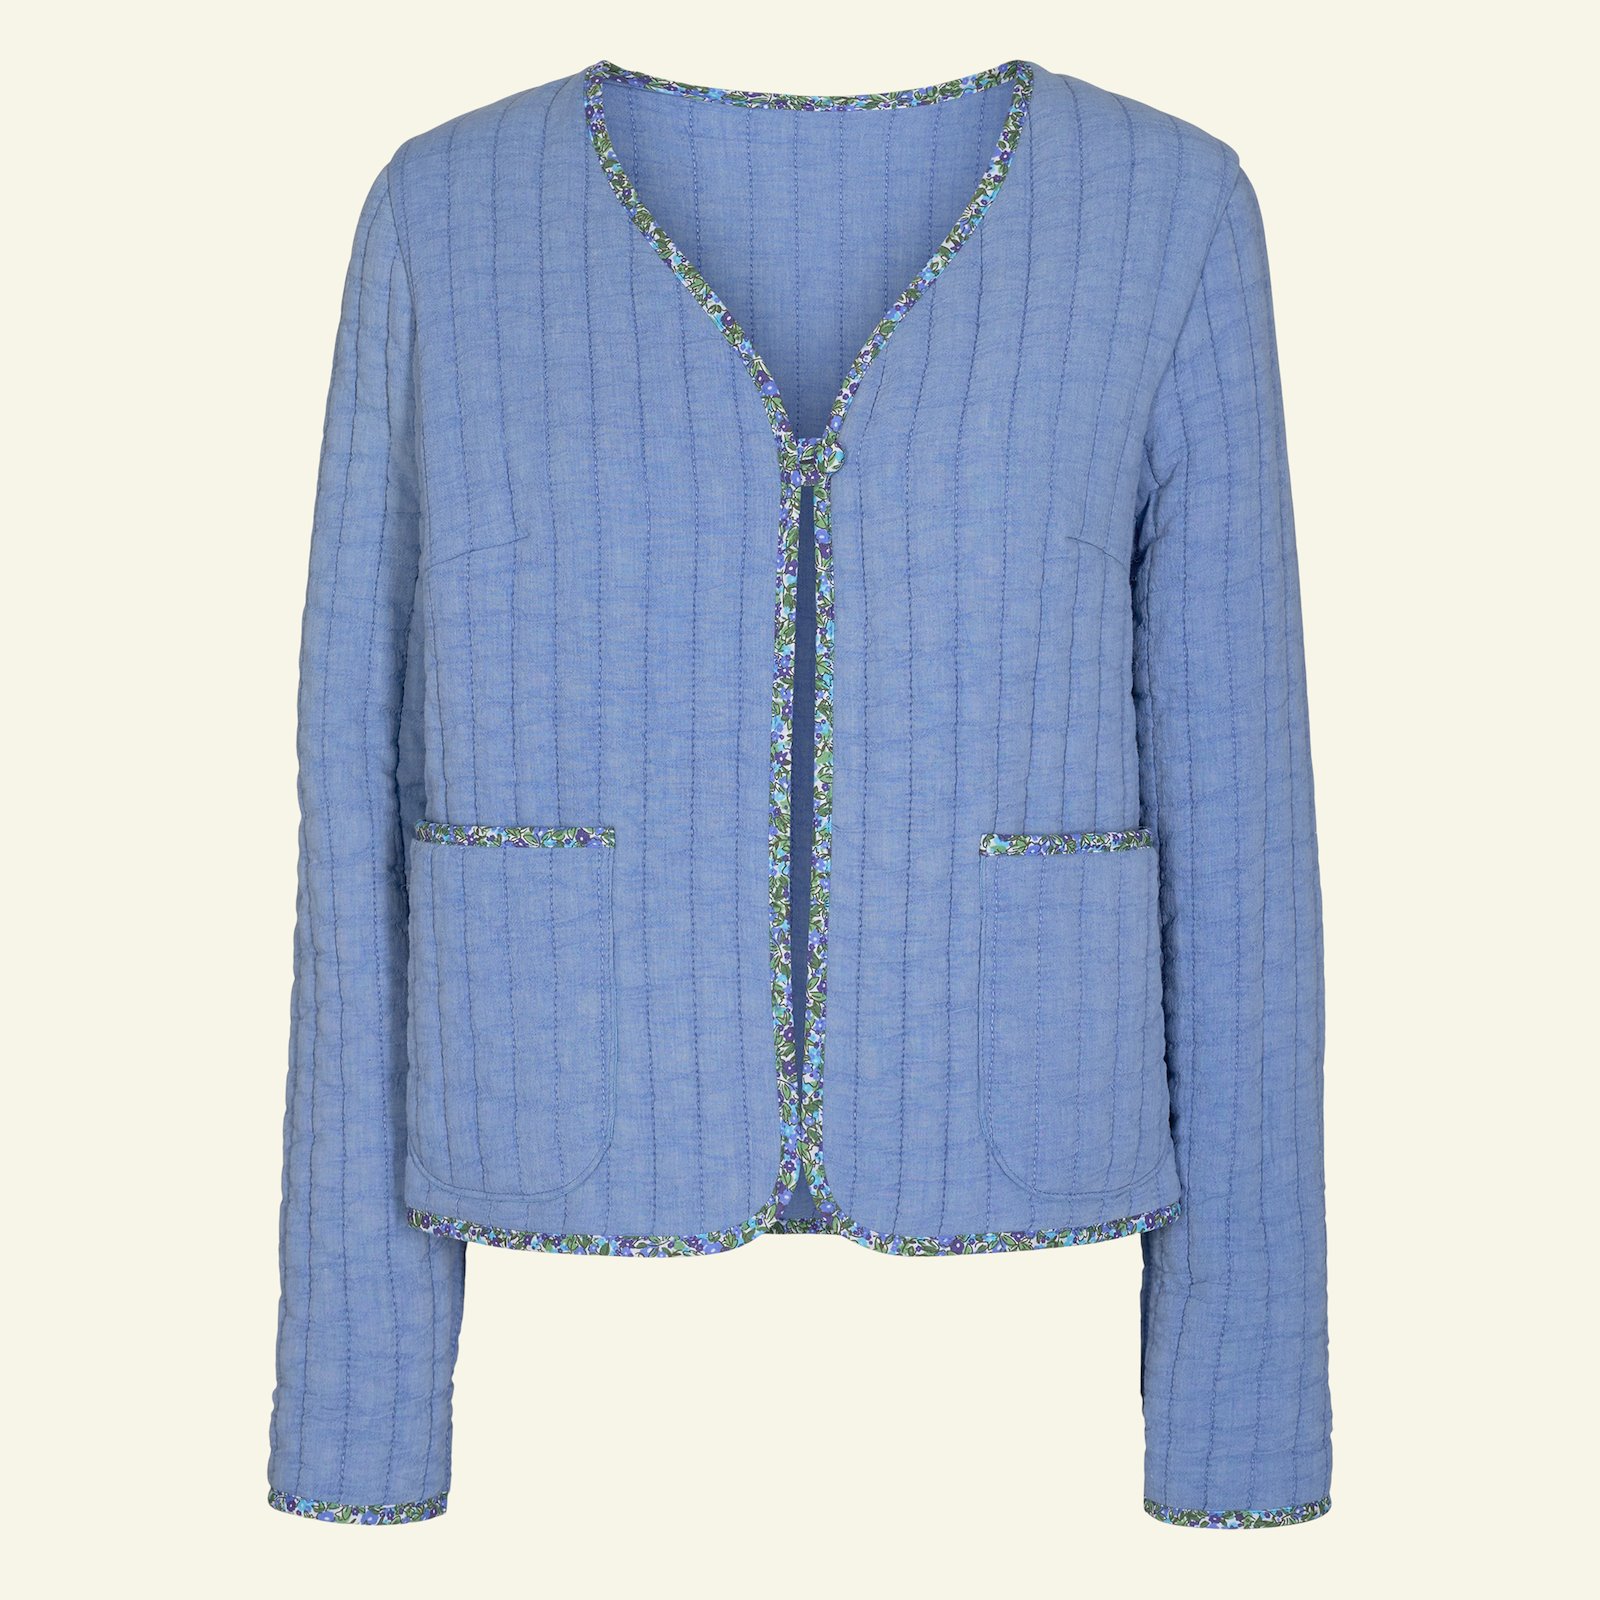 Quilted jacket and waistcoat, 38/10 p24047_920229_64110_43507_sskit